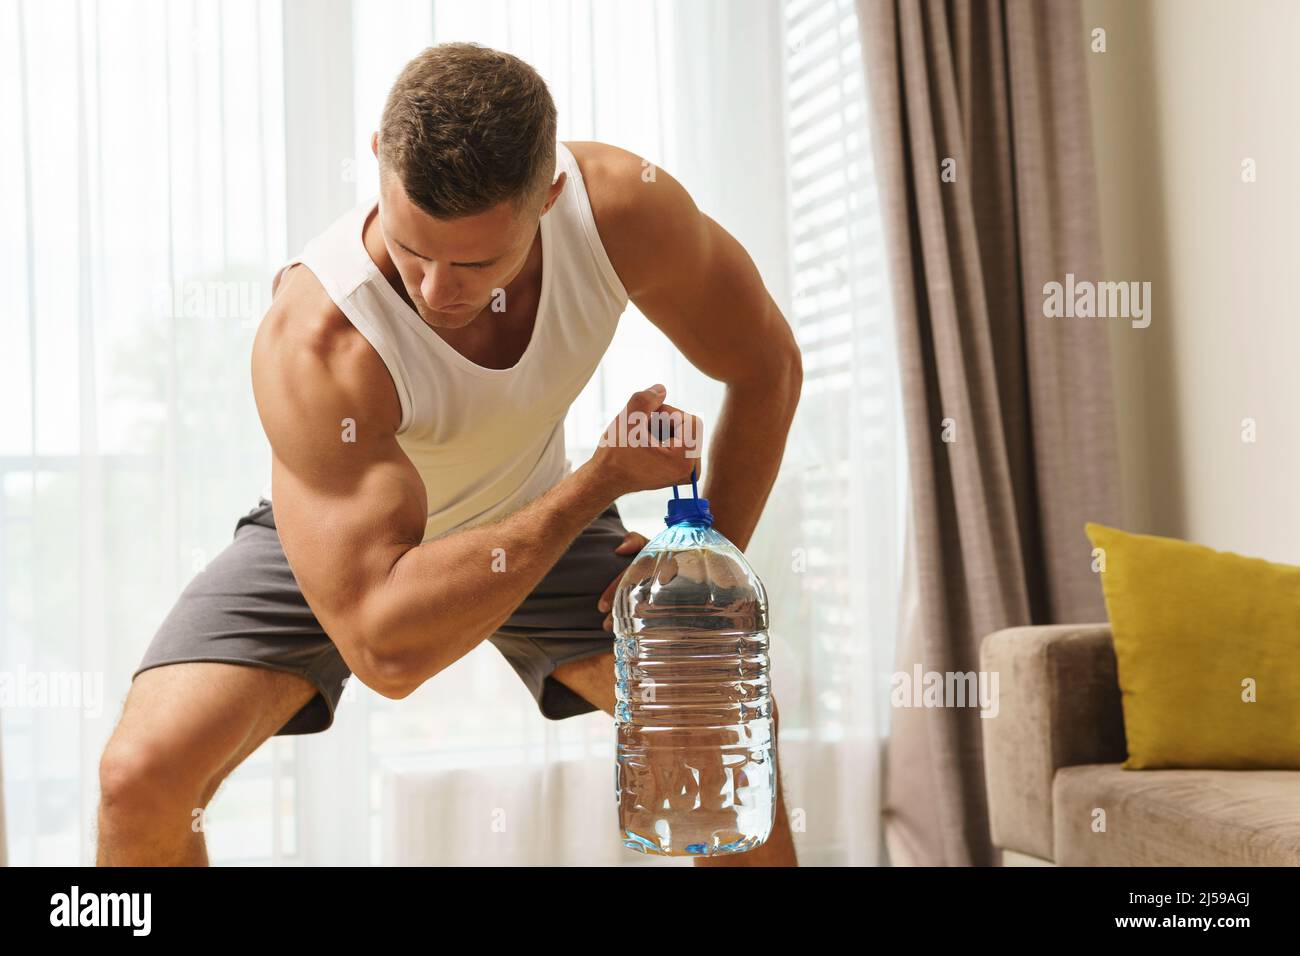 https://c8.alamy.com/comp/2J59AGJ/young-athletic-man-using-big-bottle-of-water-like-an-alternative-of-dumbbell-for-home-workout-2J59AGJ.jpg